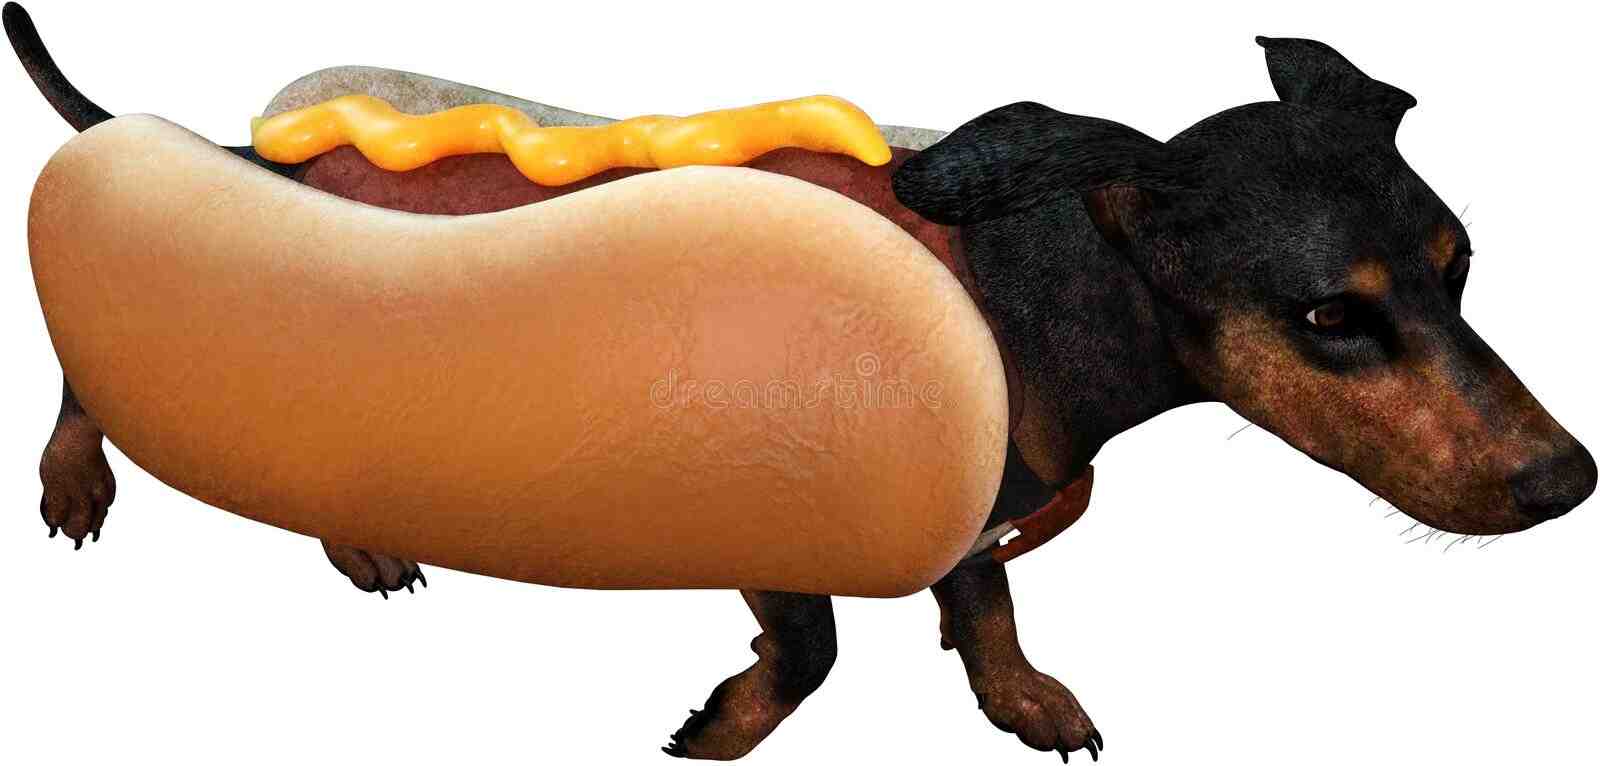 What are the ingredients inside a hot dog?